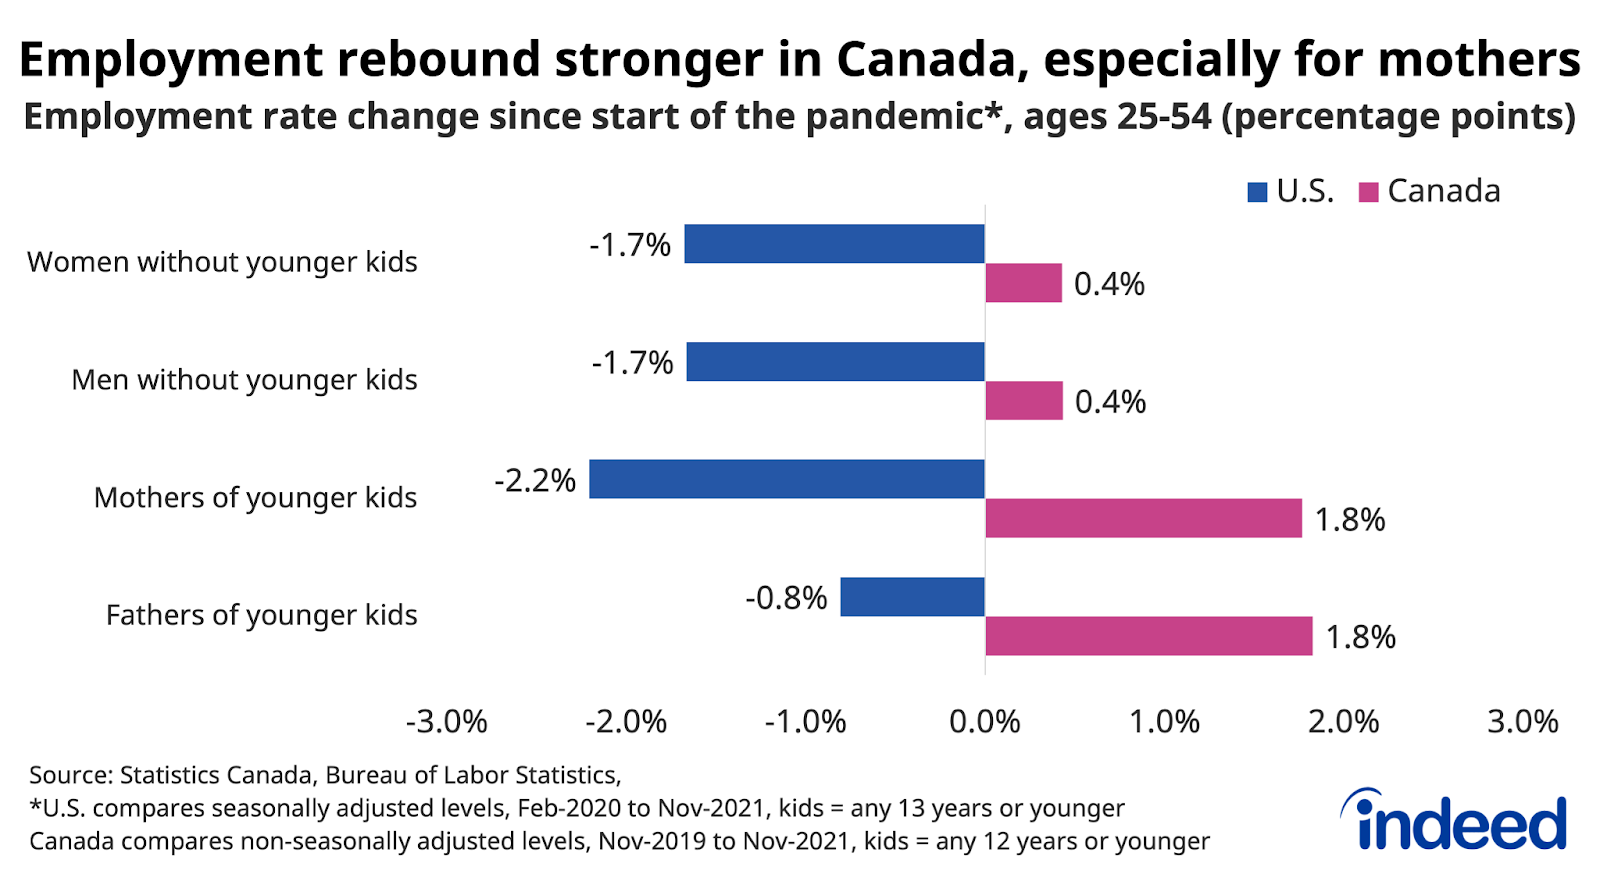 Bar chart titled “Employment rebound stronger in Canada, especially for mothers.” 